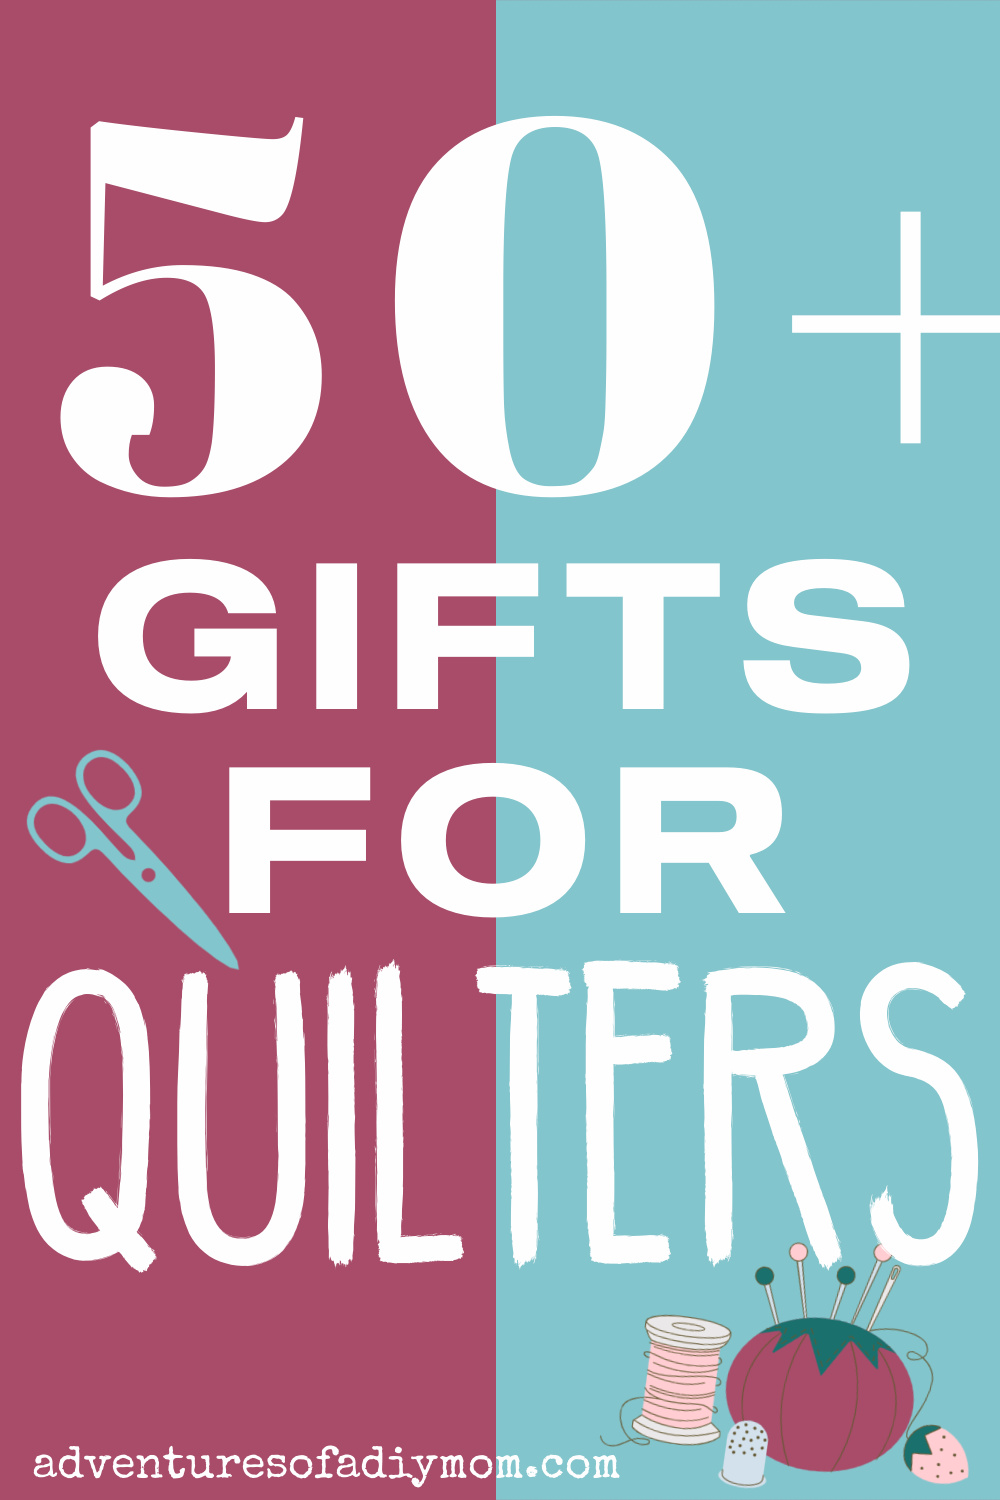 60+ Best Gifts for Quilters (Fun & Useful Ideas) - Adventures of a